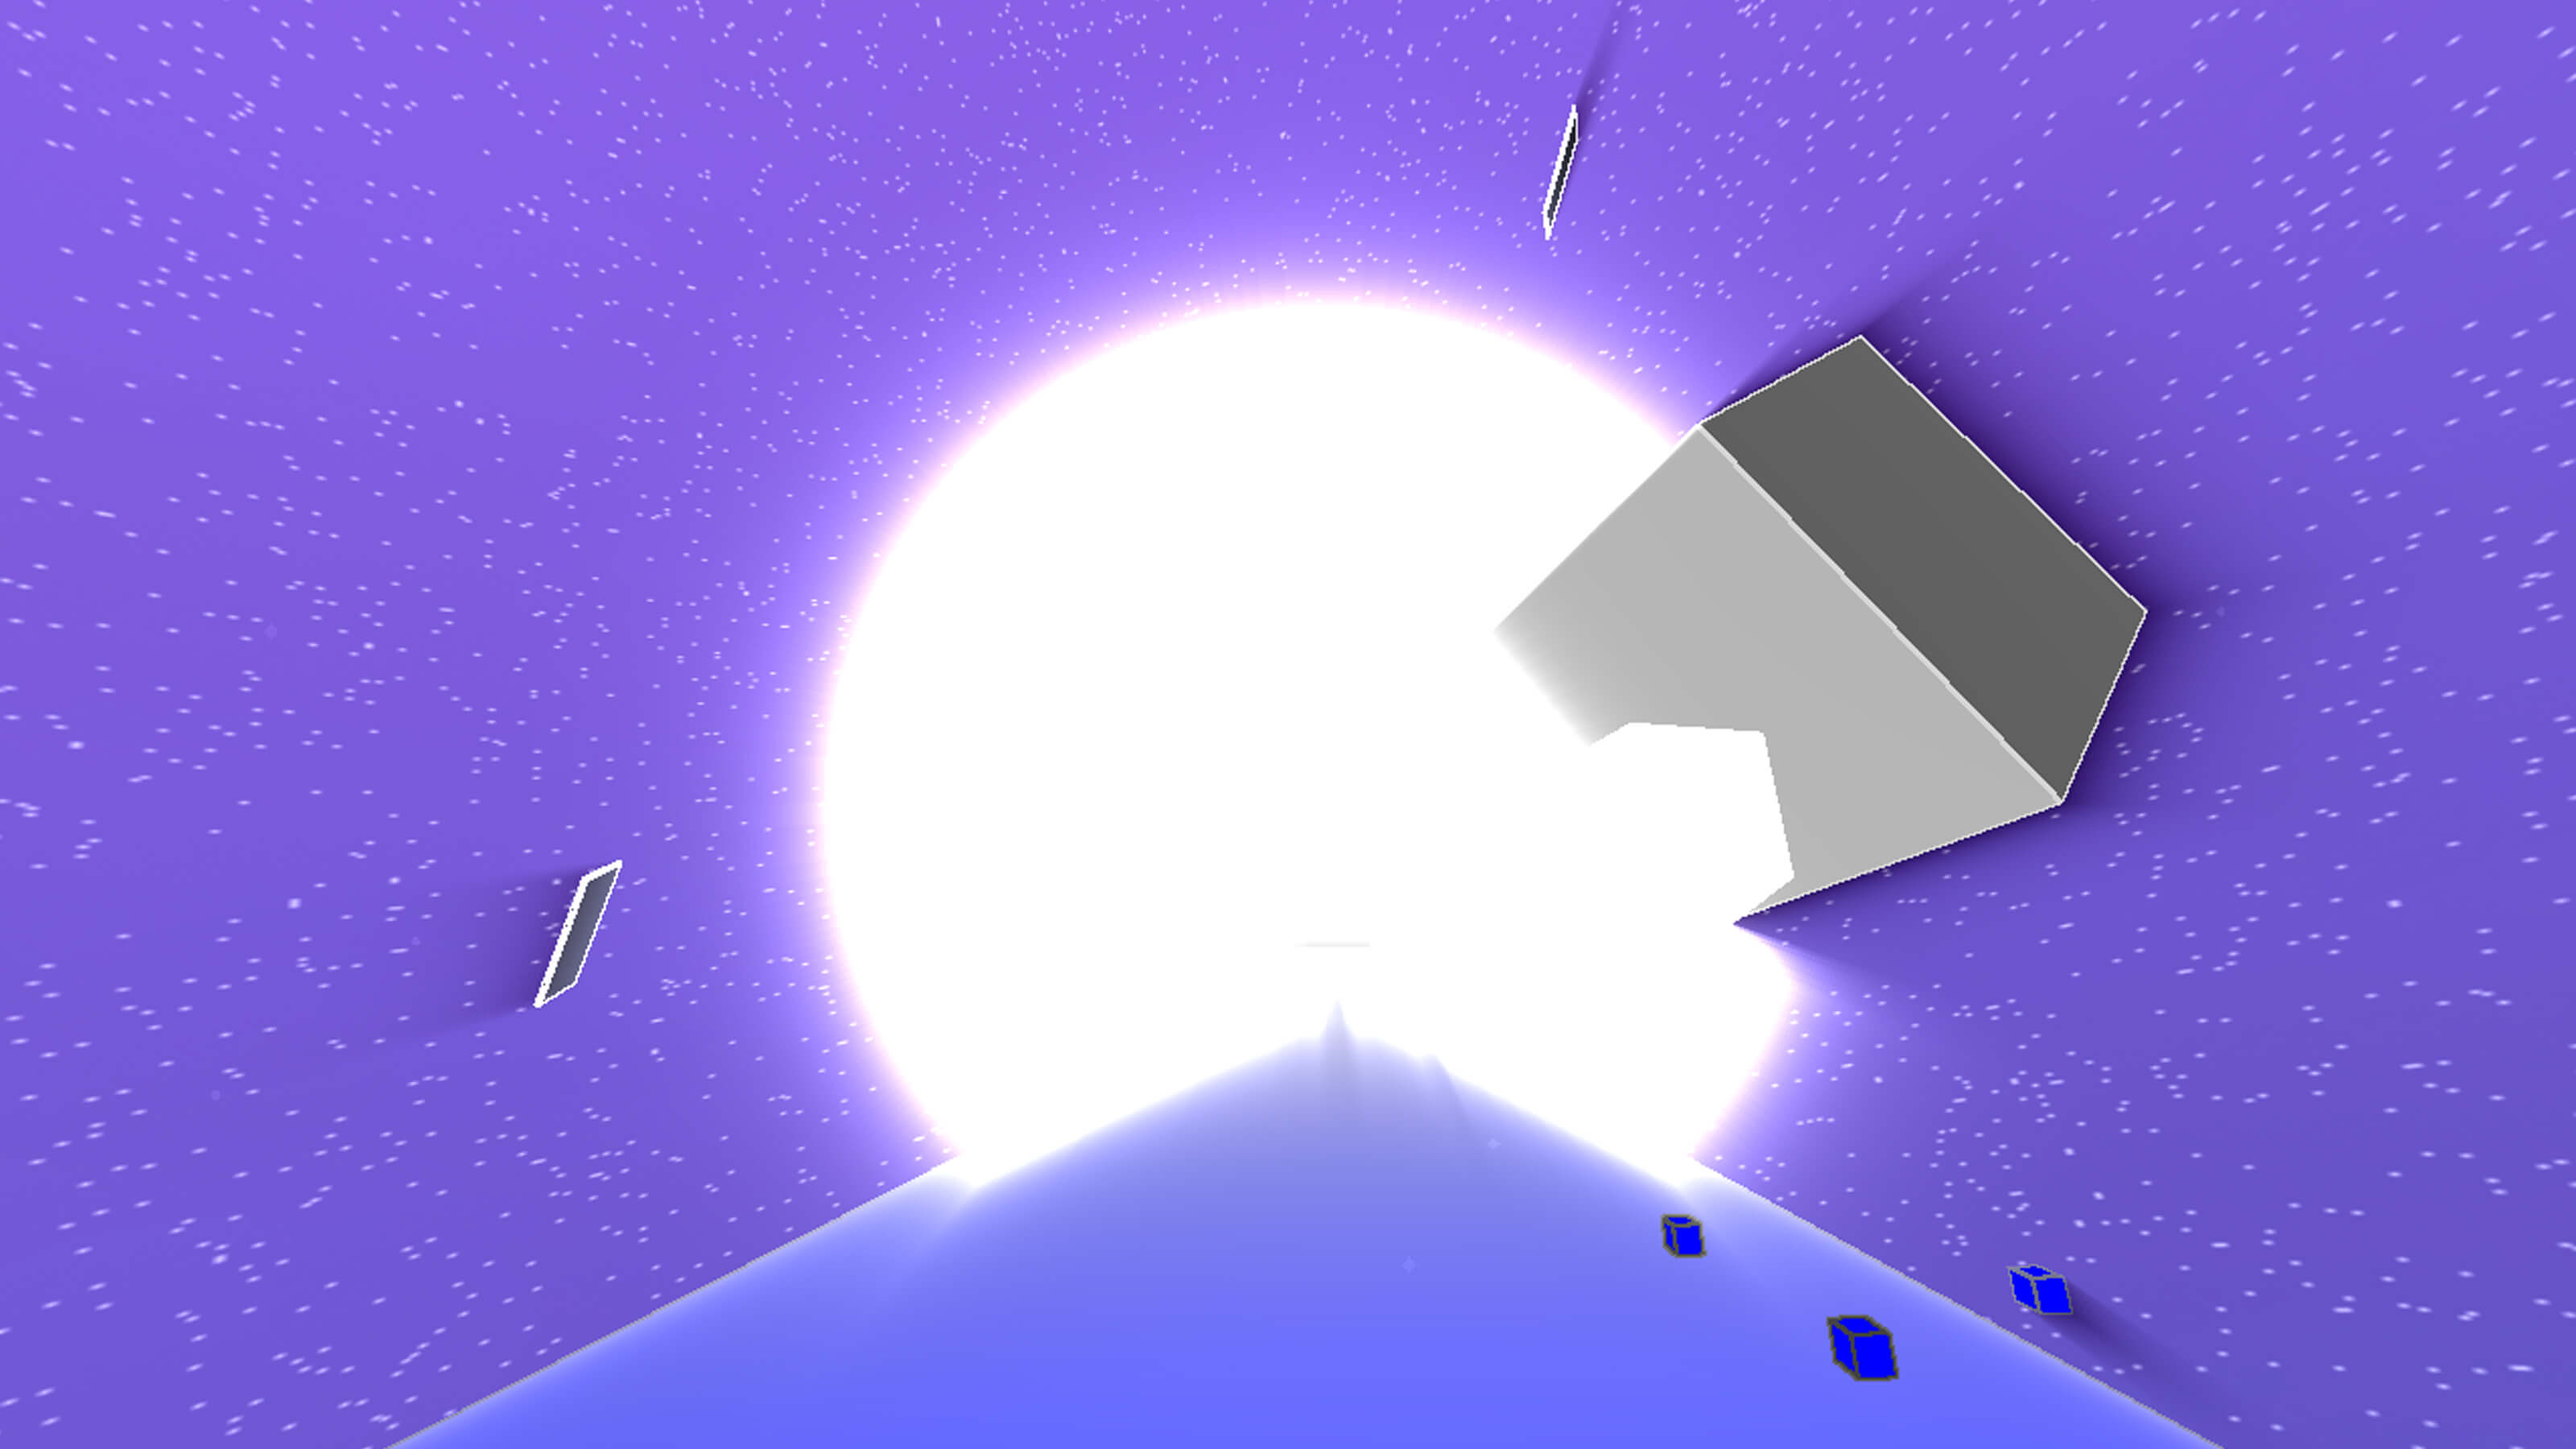 A grey cube emerges from a large light orb, three smaller blue cubes below it